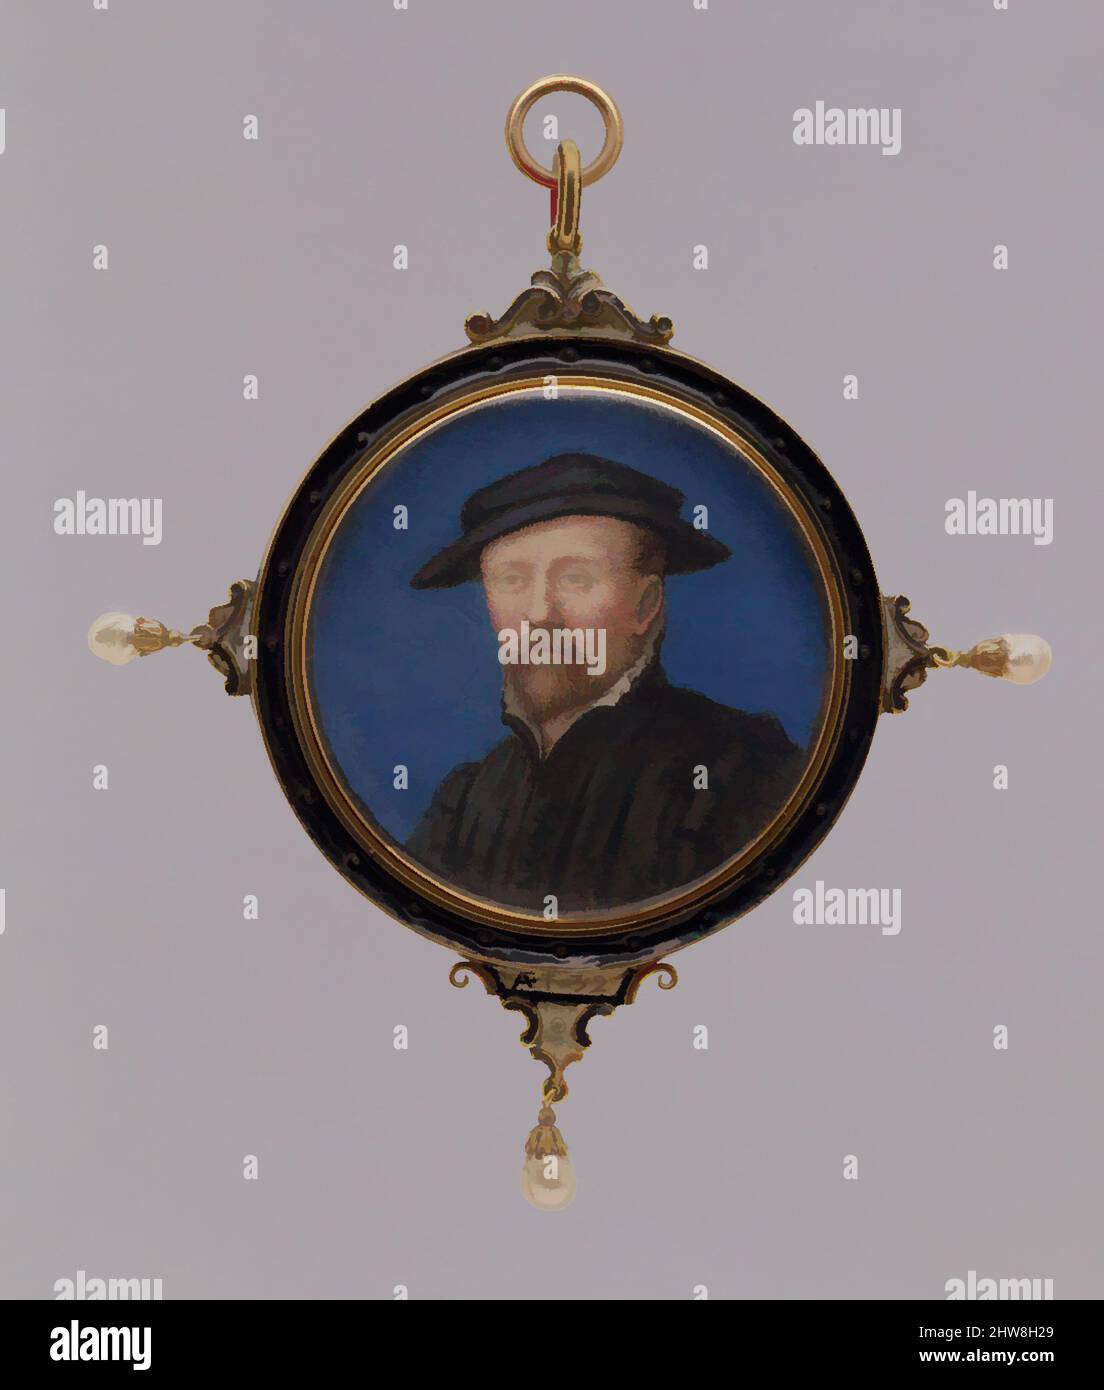 Art inspired by Portrait of a Man, Said to Be Arnold Franz, Vellum laid on card, Diameter 2 1/8 in. (53 mm), Miniatures, Imitator of Hans Holbein the Younger (17th or early 18th century, Classic works modernized by Artotop with a splash of modernity. Shapes, color and value, eye-catching visual impact on art. Emotions through freedom of artworks in a contemporary way. A timeless message pursuing a wildly creative new direction. Artists turning to the digital medium and creating the Artotop NFT Stock Photo